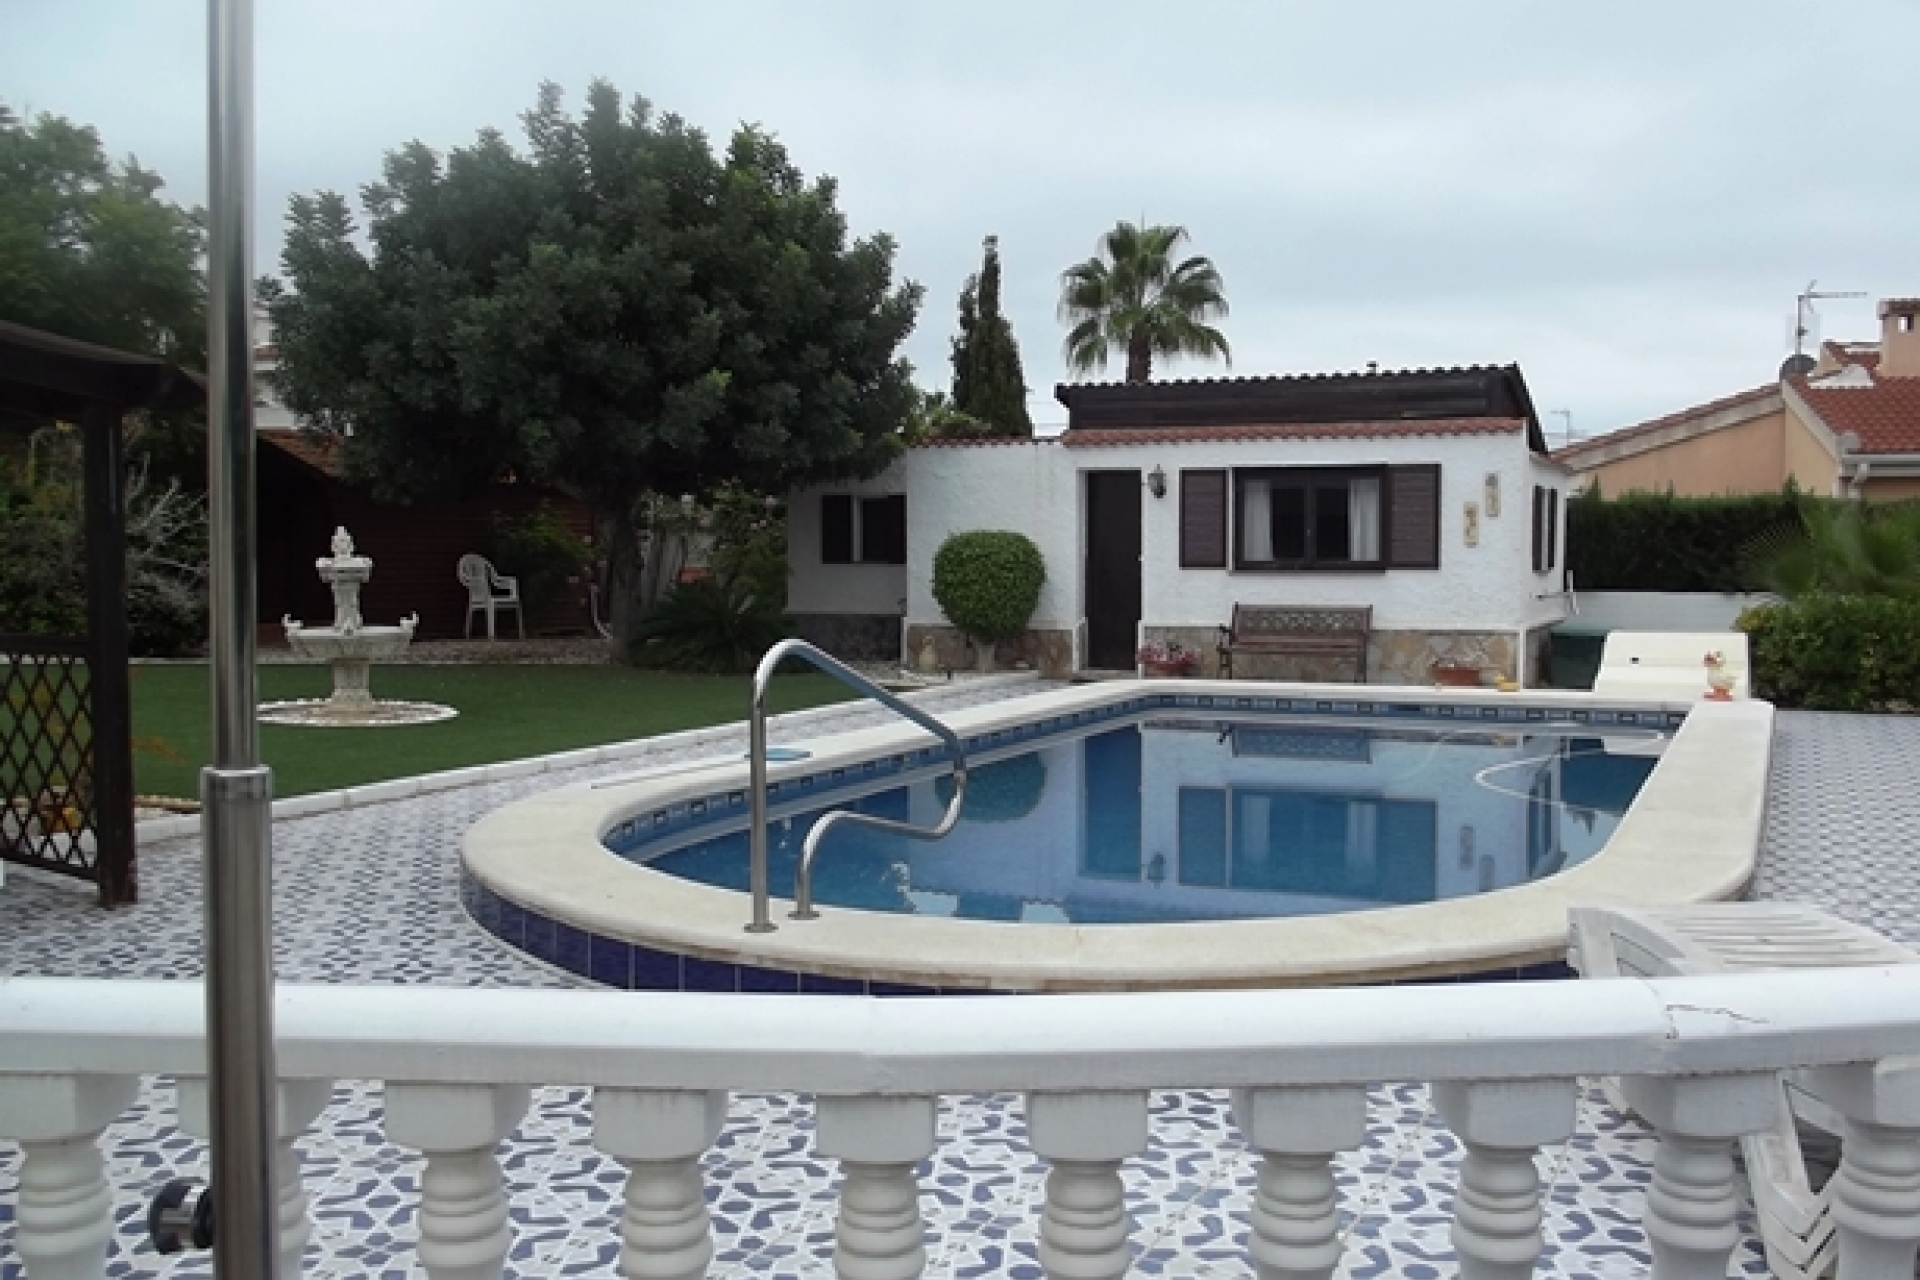 Spains Costa Blanca near Guardamar and Torrevieja, for sale in Ciudad Quesada, cheap, bargain property.